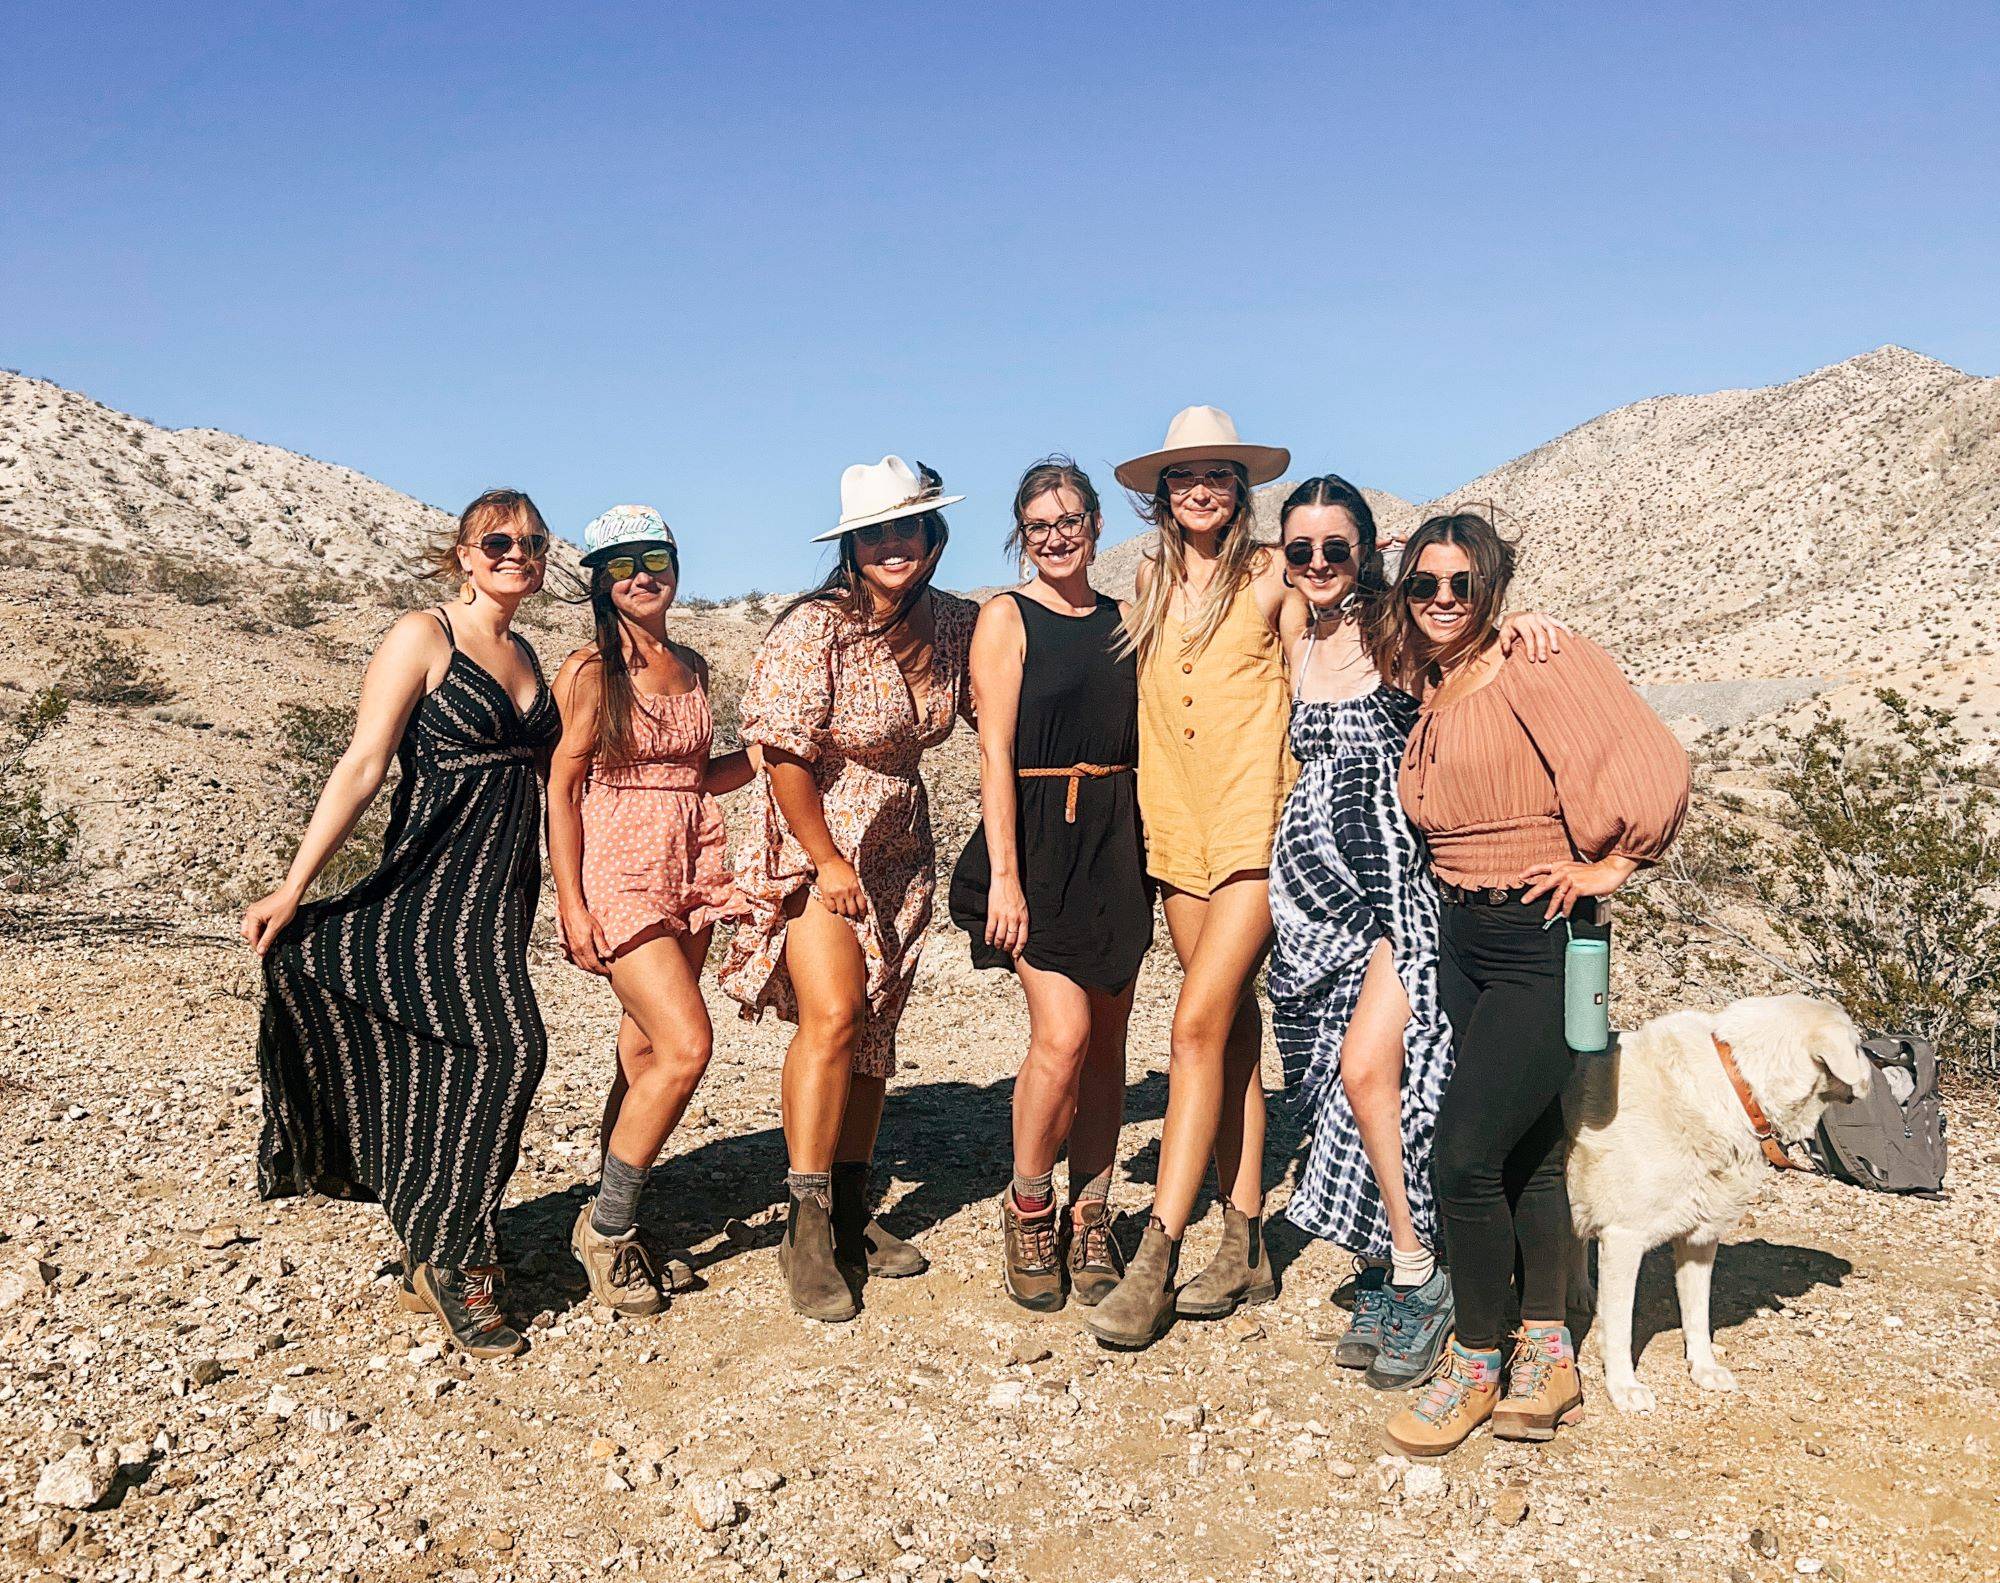 Seven solo female vanlifers celebrated Thanksgiving together in the desert.